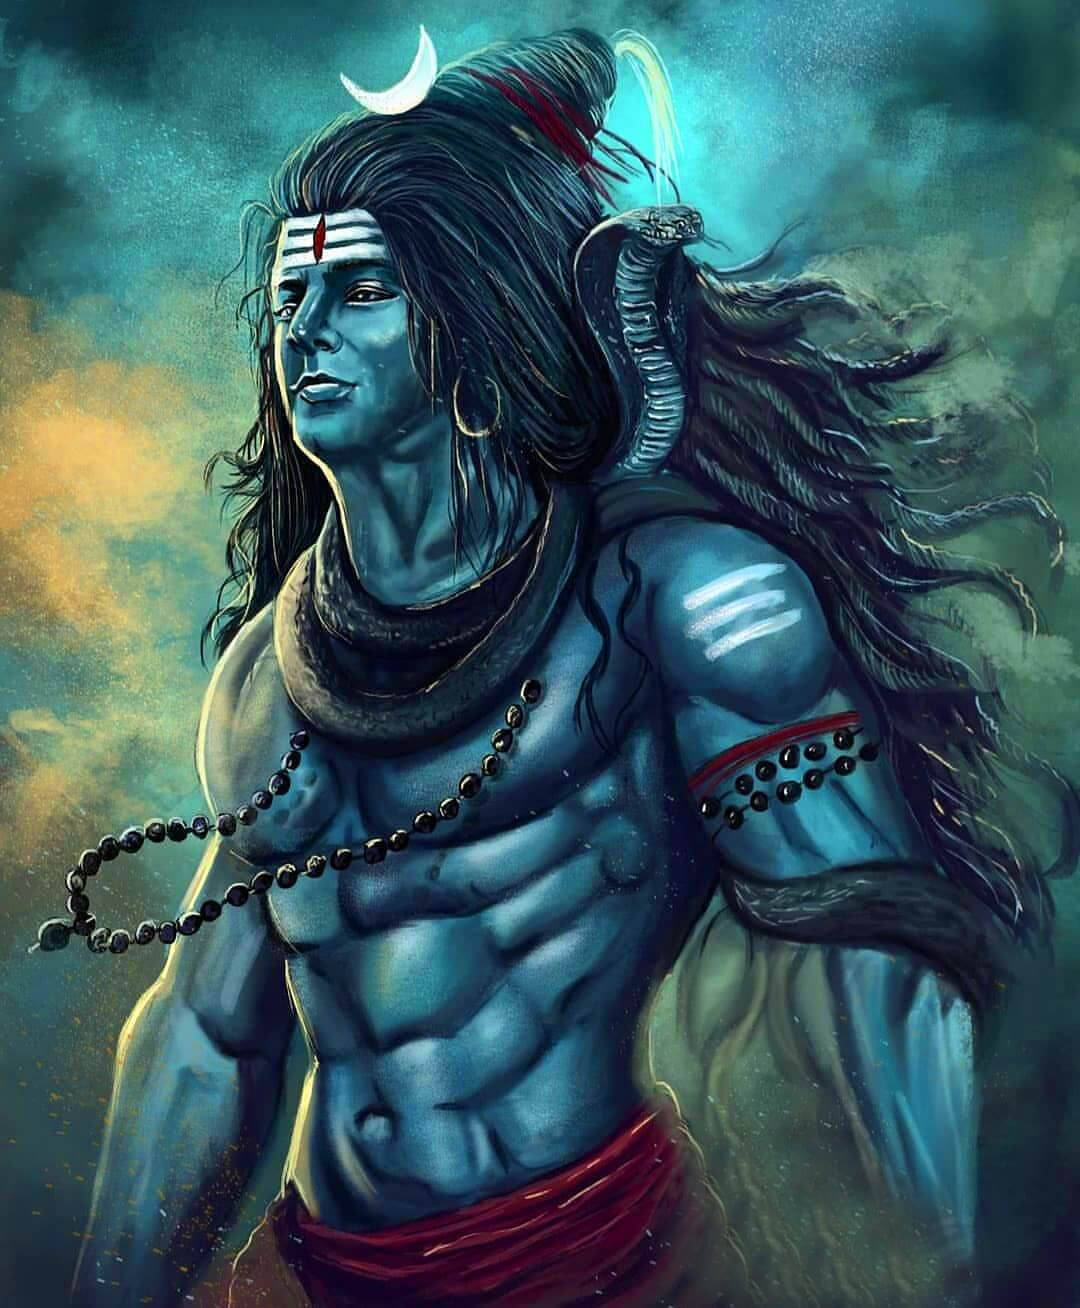 The Ultimate Collection of High-Quality 4K Mahadev Images – Over 999+ Breathtaking HD Mahadev Images